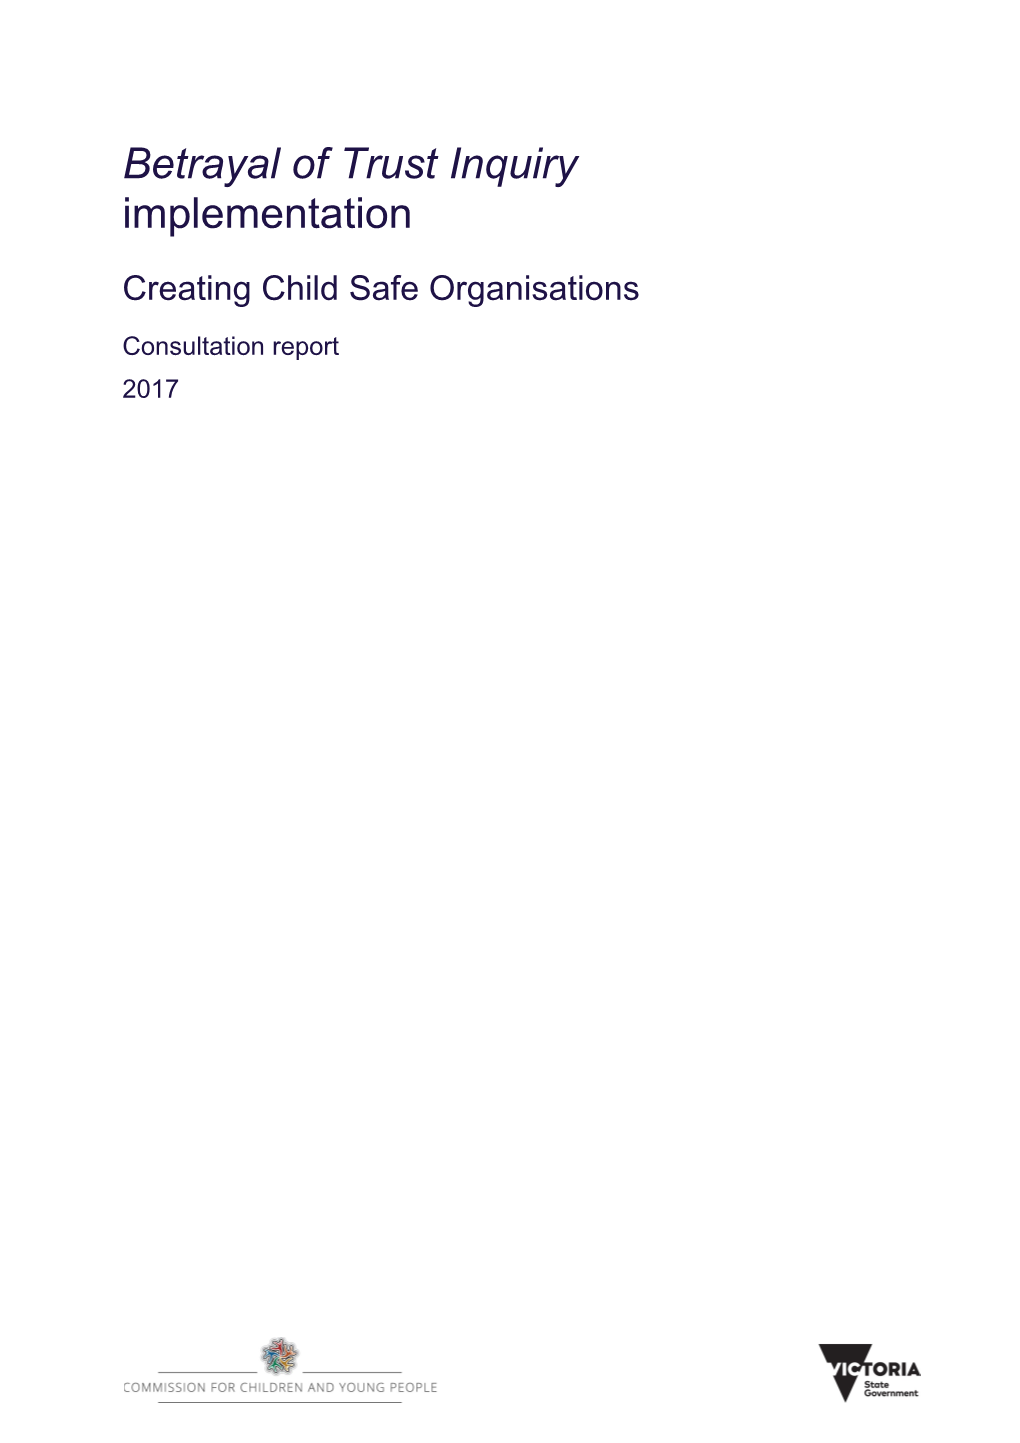 Consultation Report 2015 - Child Safe Standards and Capacity Building